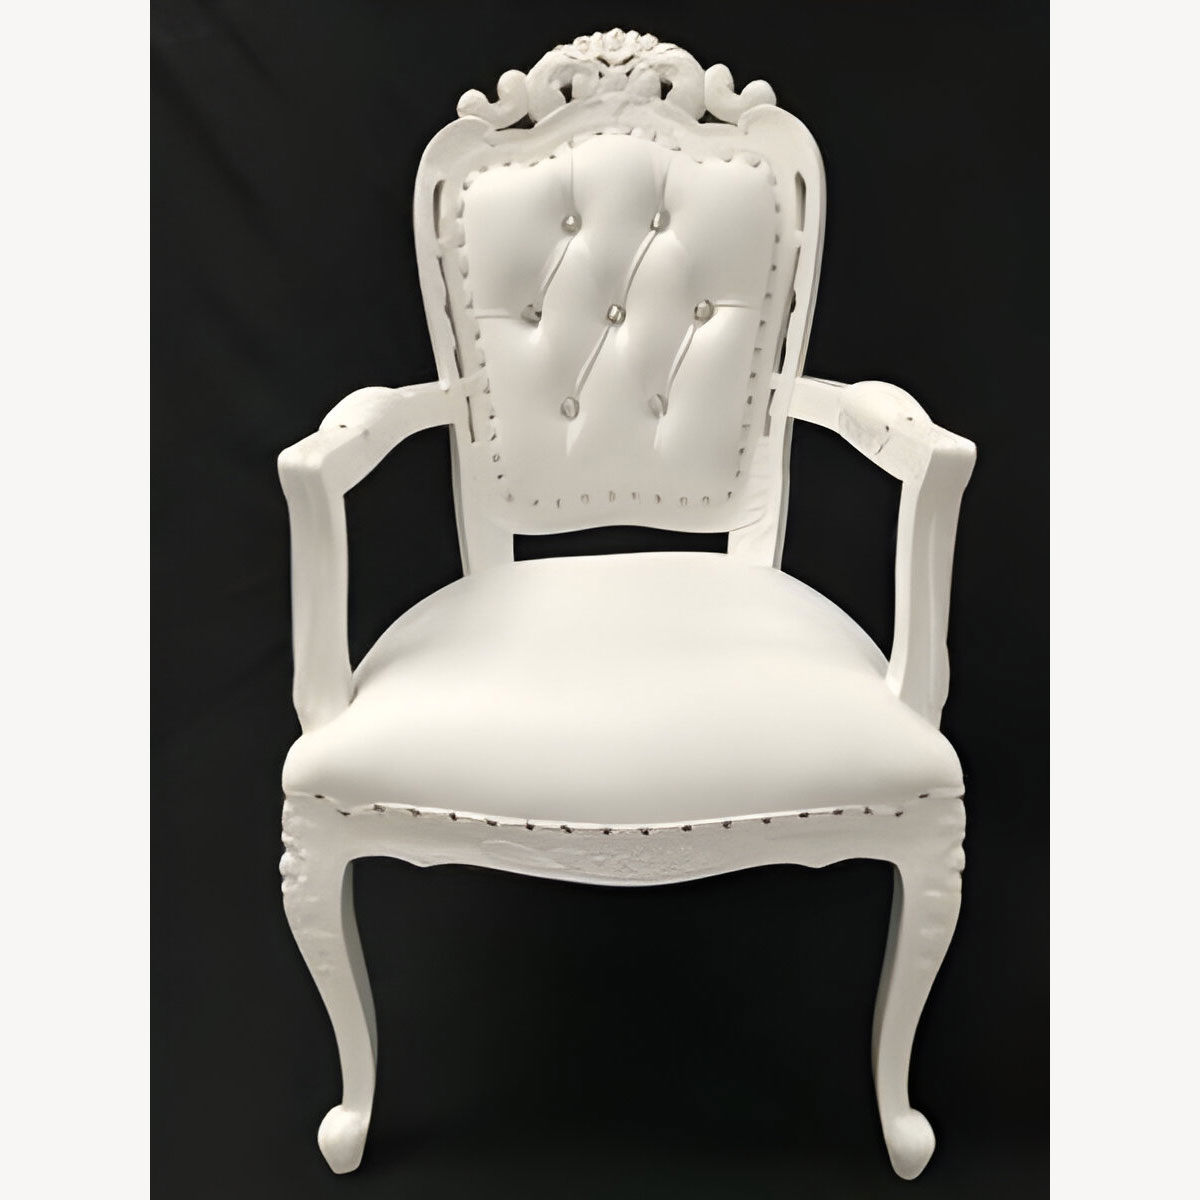 Charles Louis Cuddler Love Seat Wedding Set White Gloss With Crystals Sofa Plus Two Chairs 3 - Hampshire Barn Interiors - Charles Louis Cuddler Love Seat Wedding Set White Gloss With Crystals Sofa Plus Two Chairs -